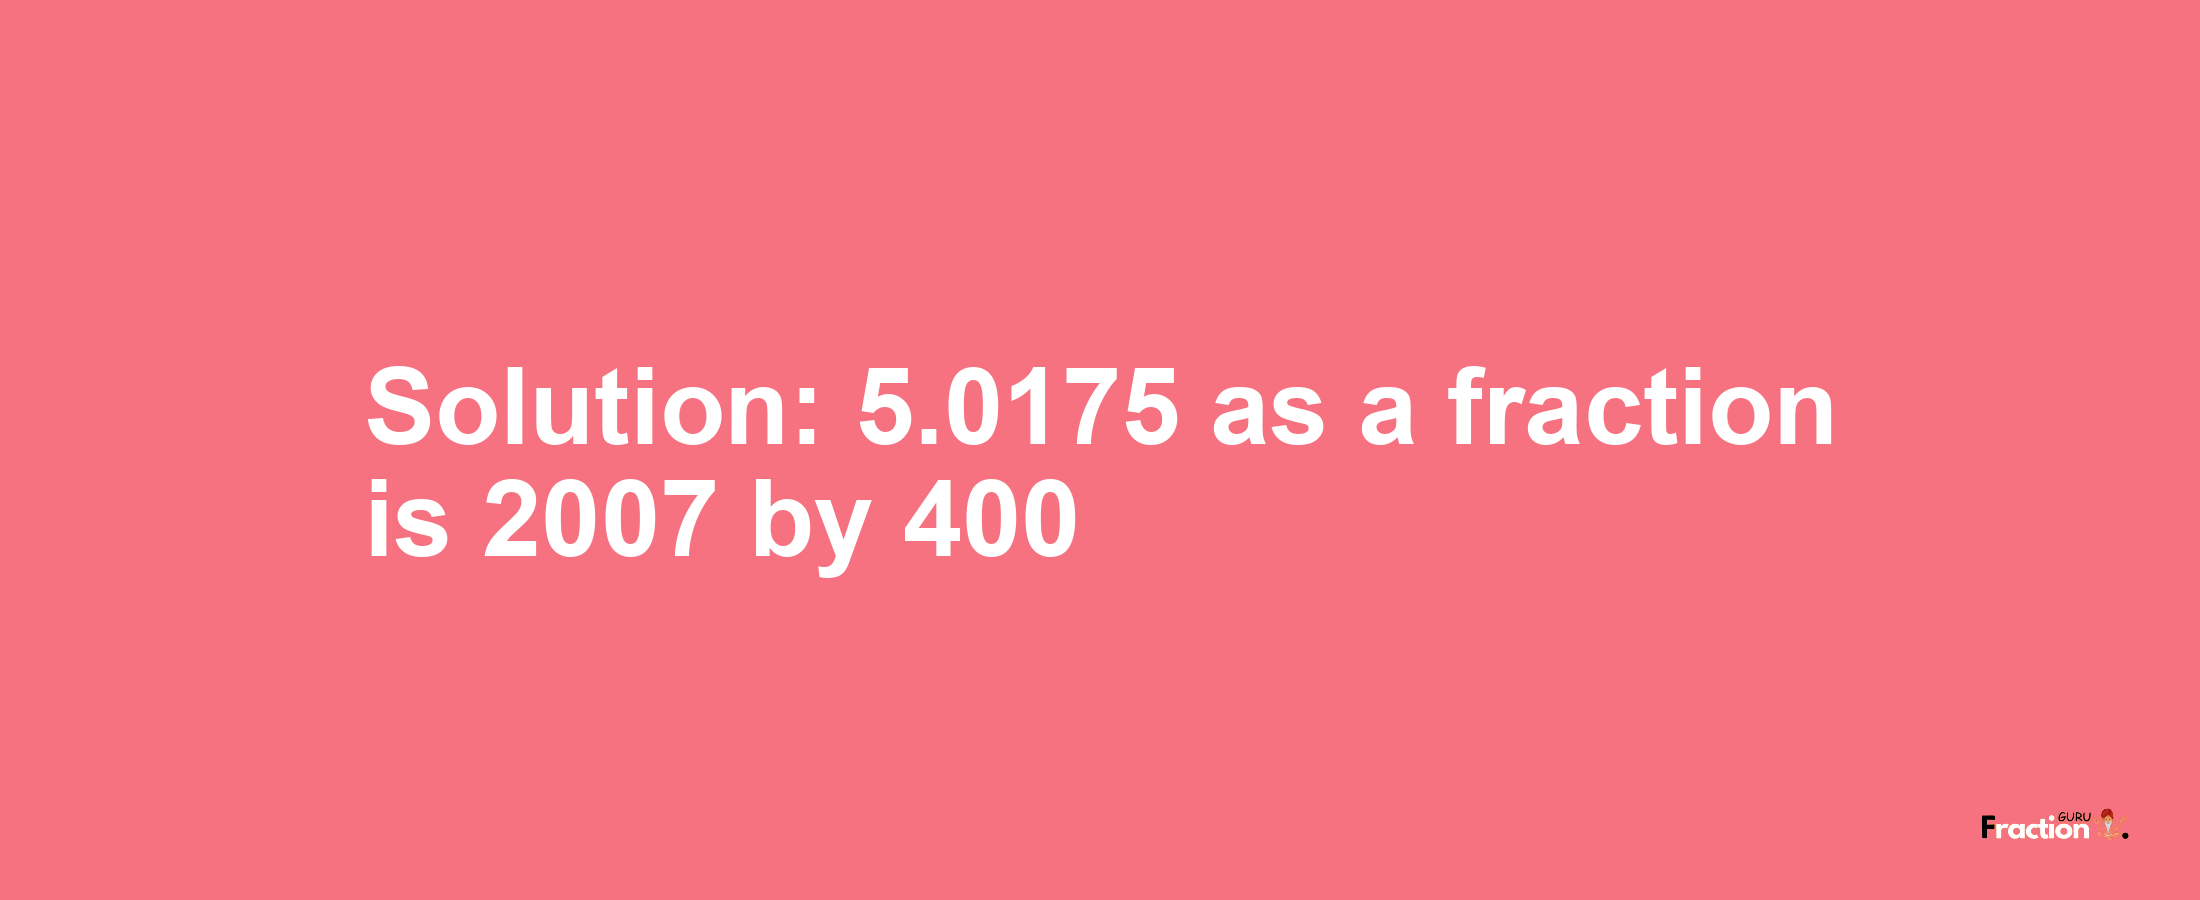 Solution:5.0175 as a fraction is 2007/400